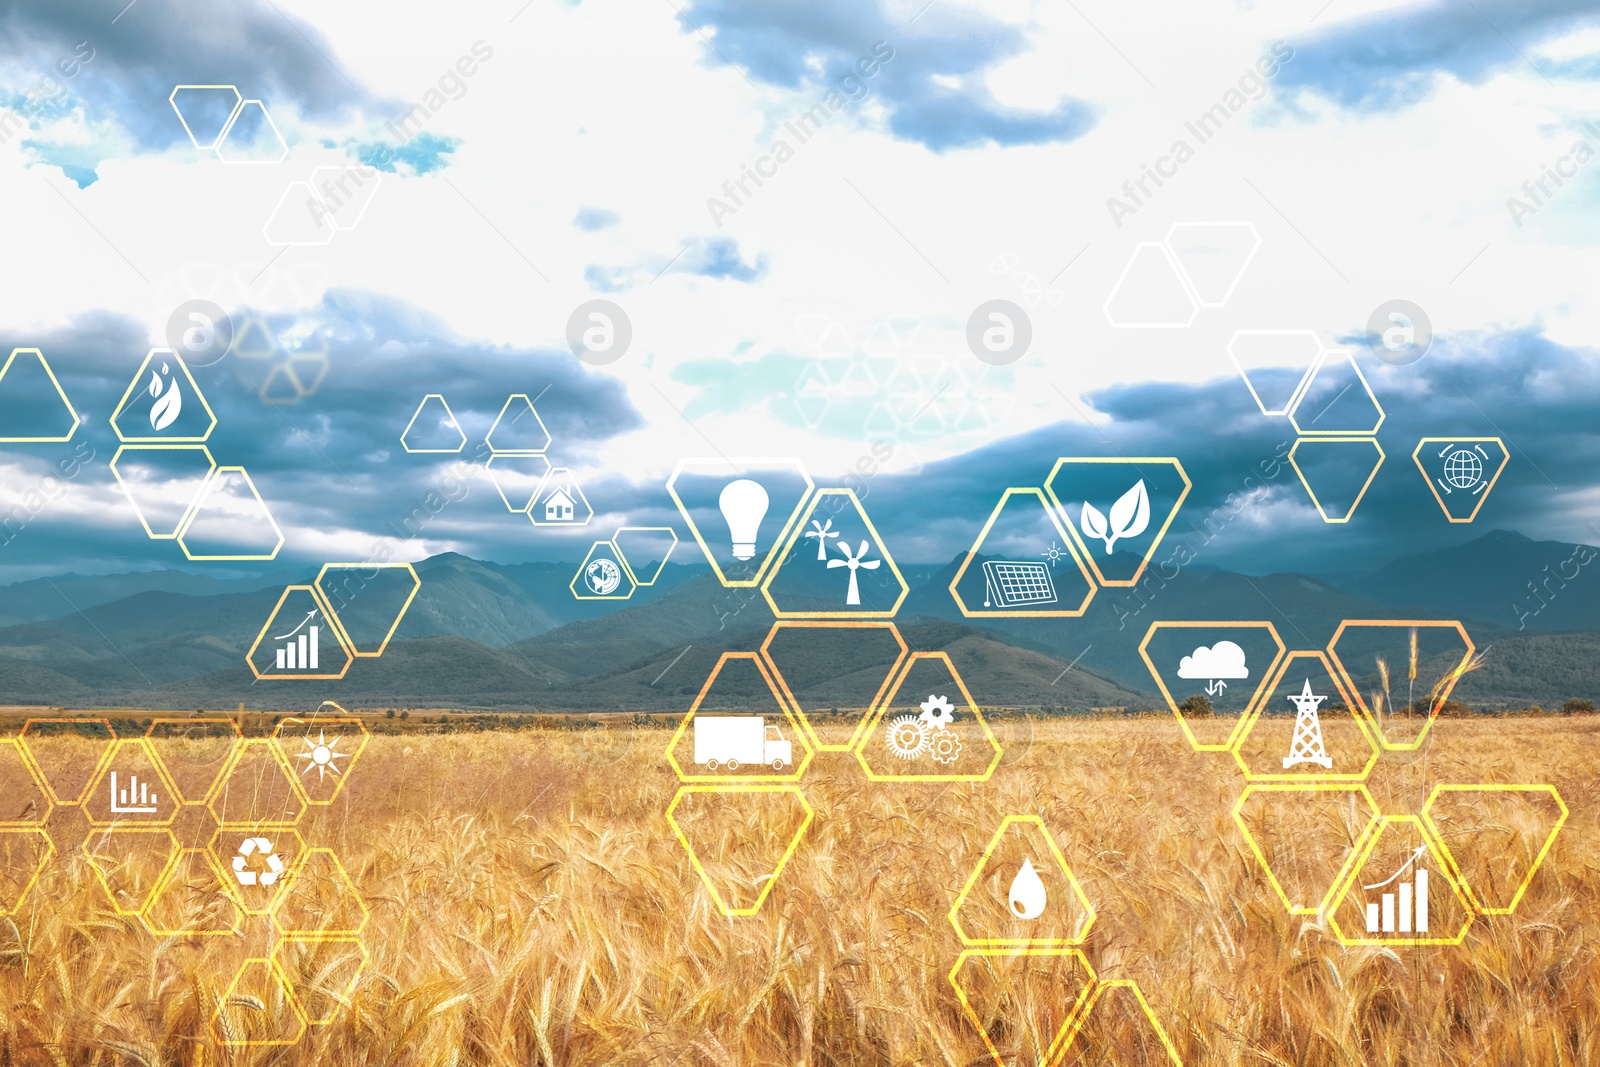 Image of Digital eco icons and beautiful view of wheat field on cloudy sky